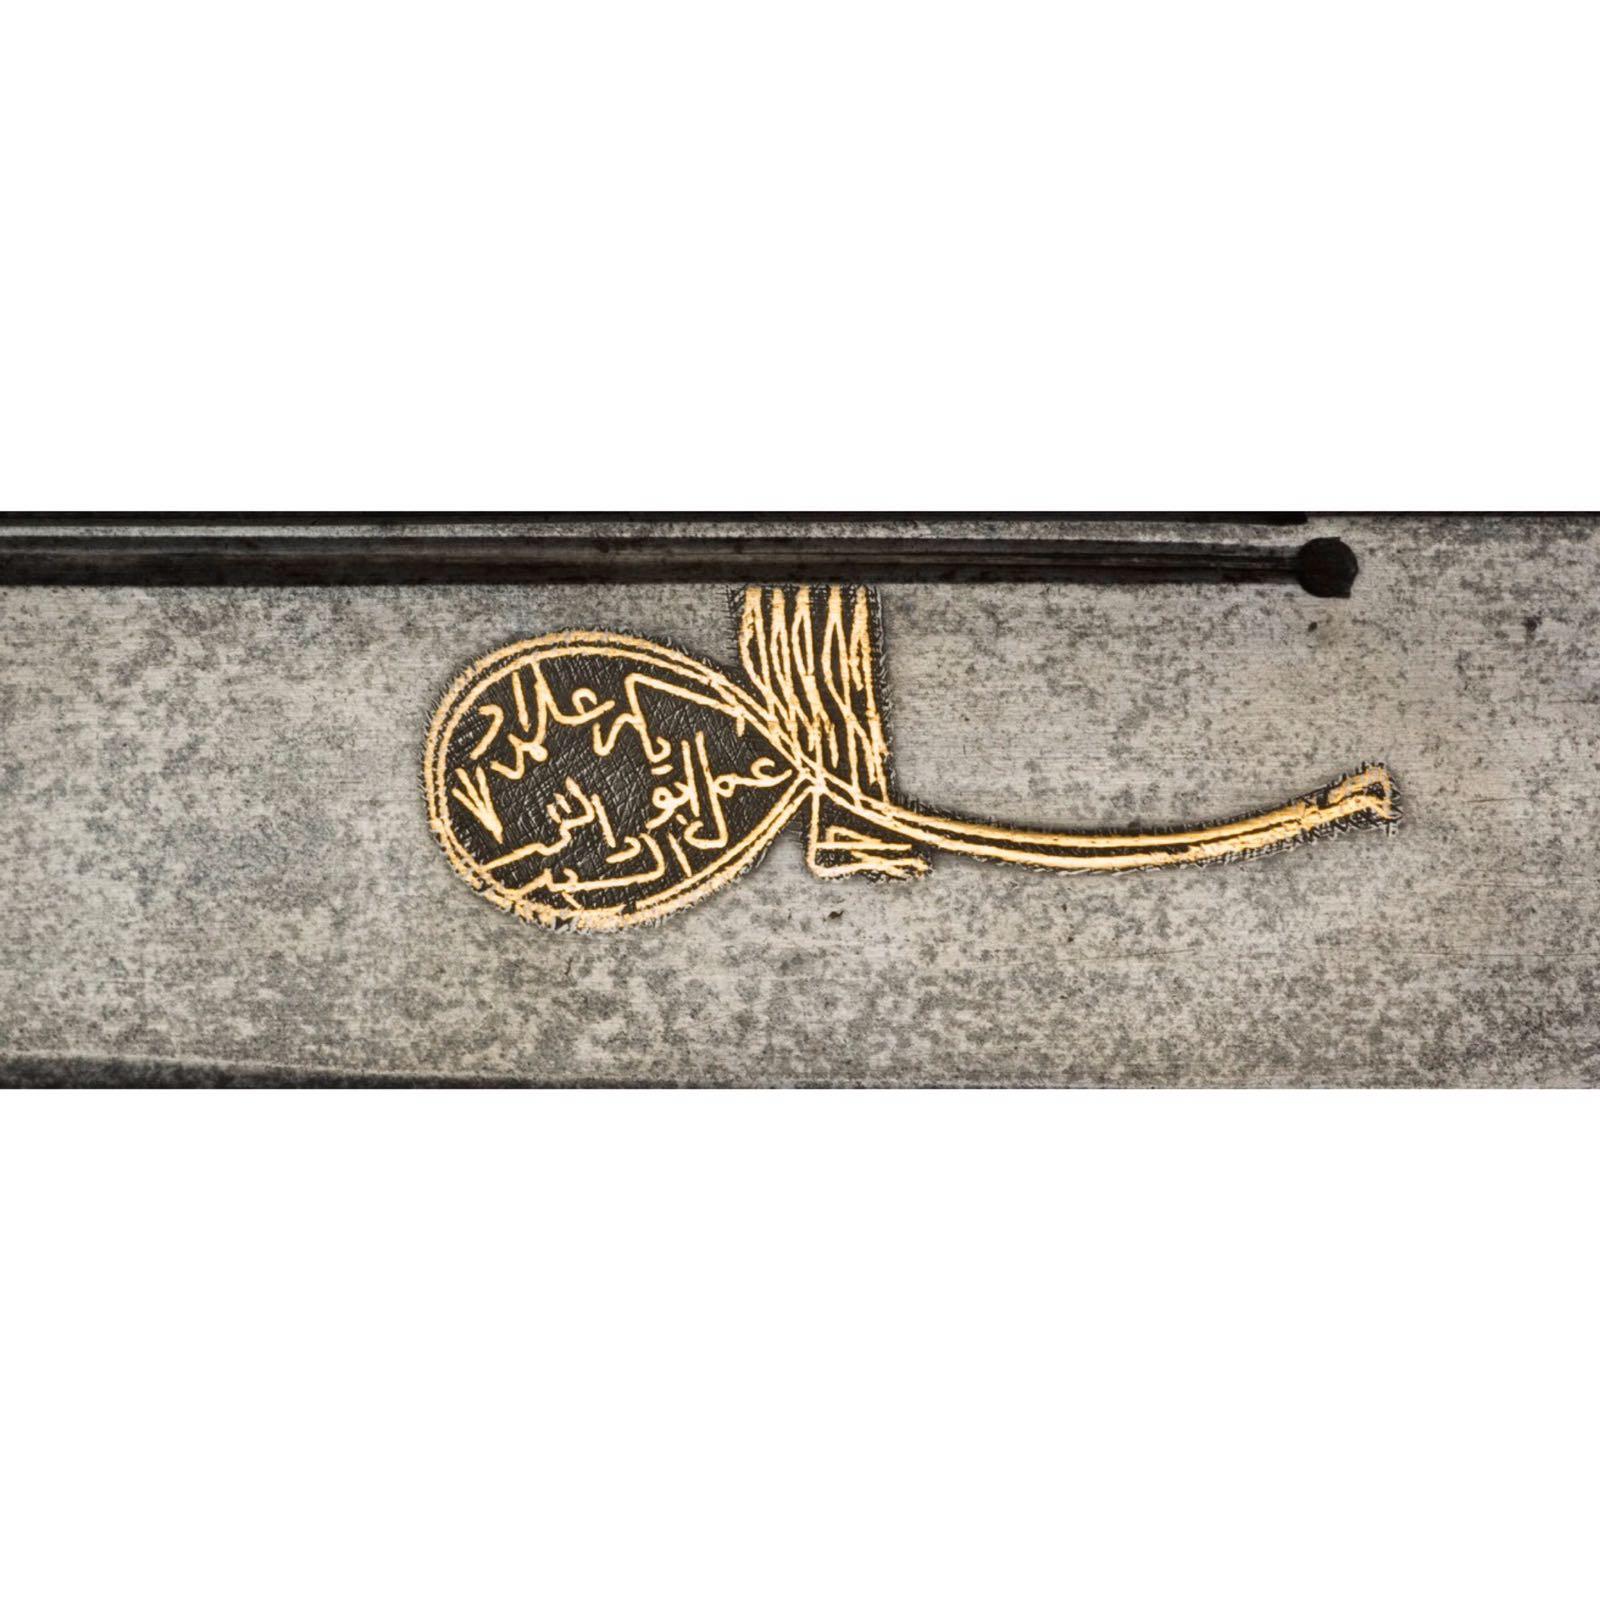 An Ottoman Yataghan with the blade engraved in gold inlaid with the maker’s name and dated to 1222 H.D.

Measures: Sword 73 cm 
Blade: 57 cm.
    